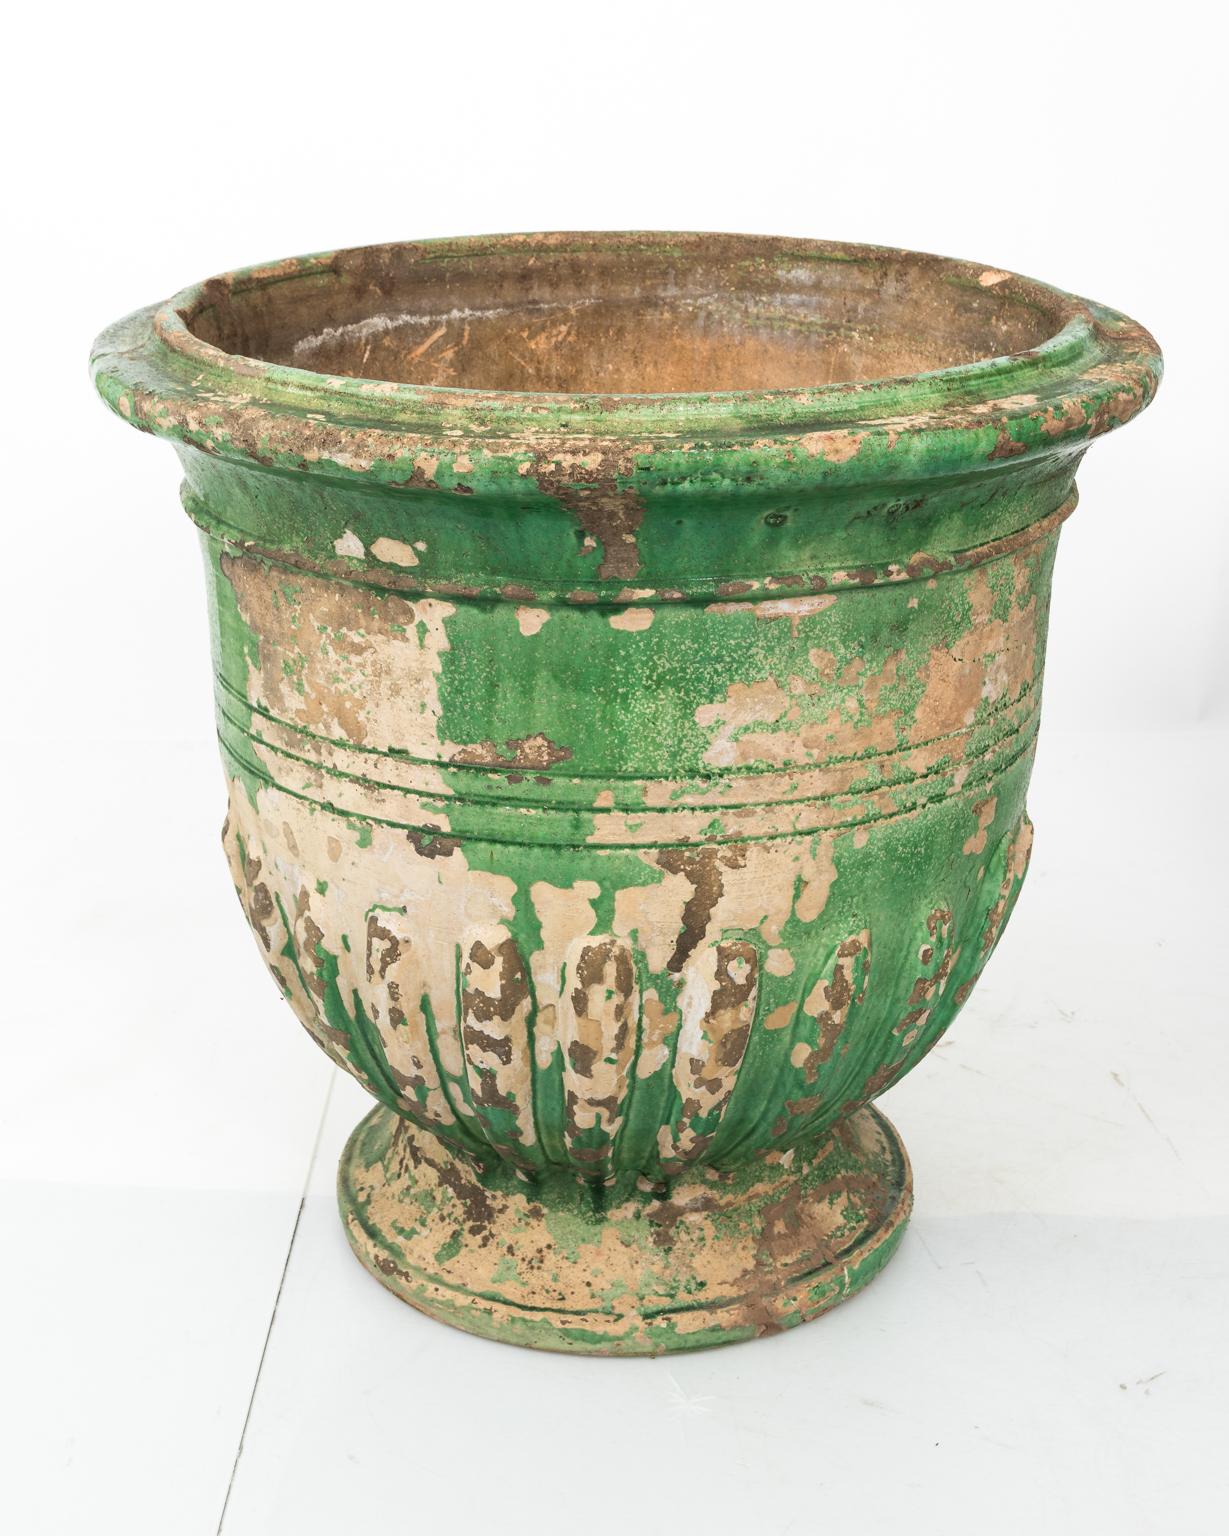 Large French green glazed ceramic urn in a distressed finish, circa 20th century. Please note of wear consistent with age causing paint loss.